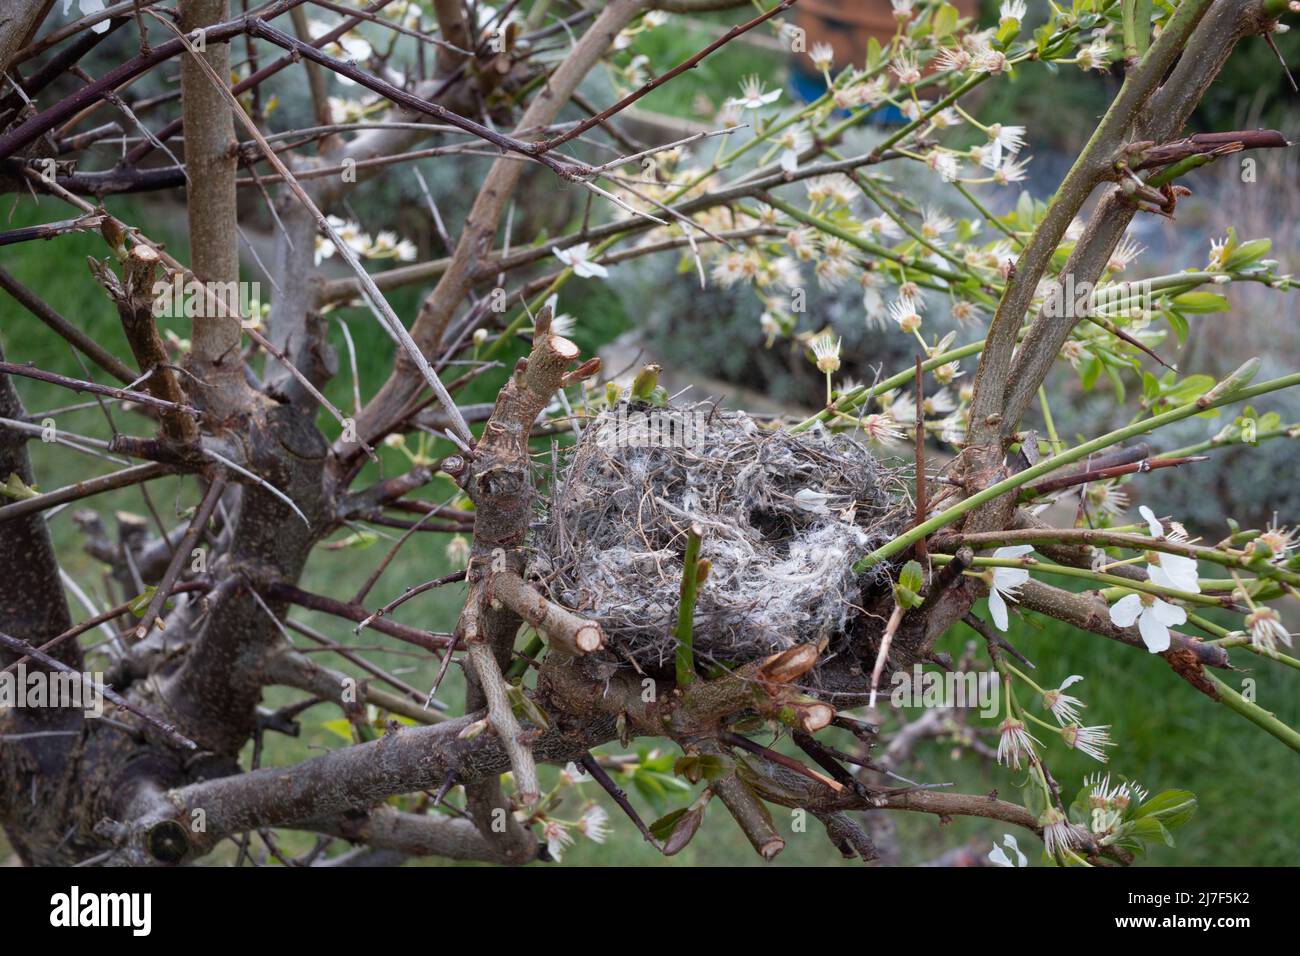 A small nest, probably made by a blue tit, has been built in the branches of a plum tree. Stock Photo